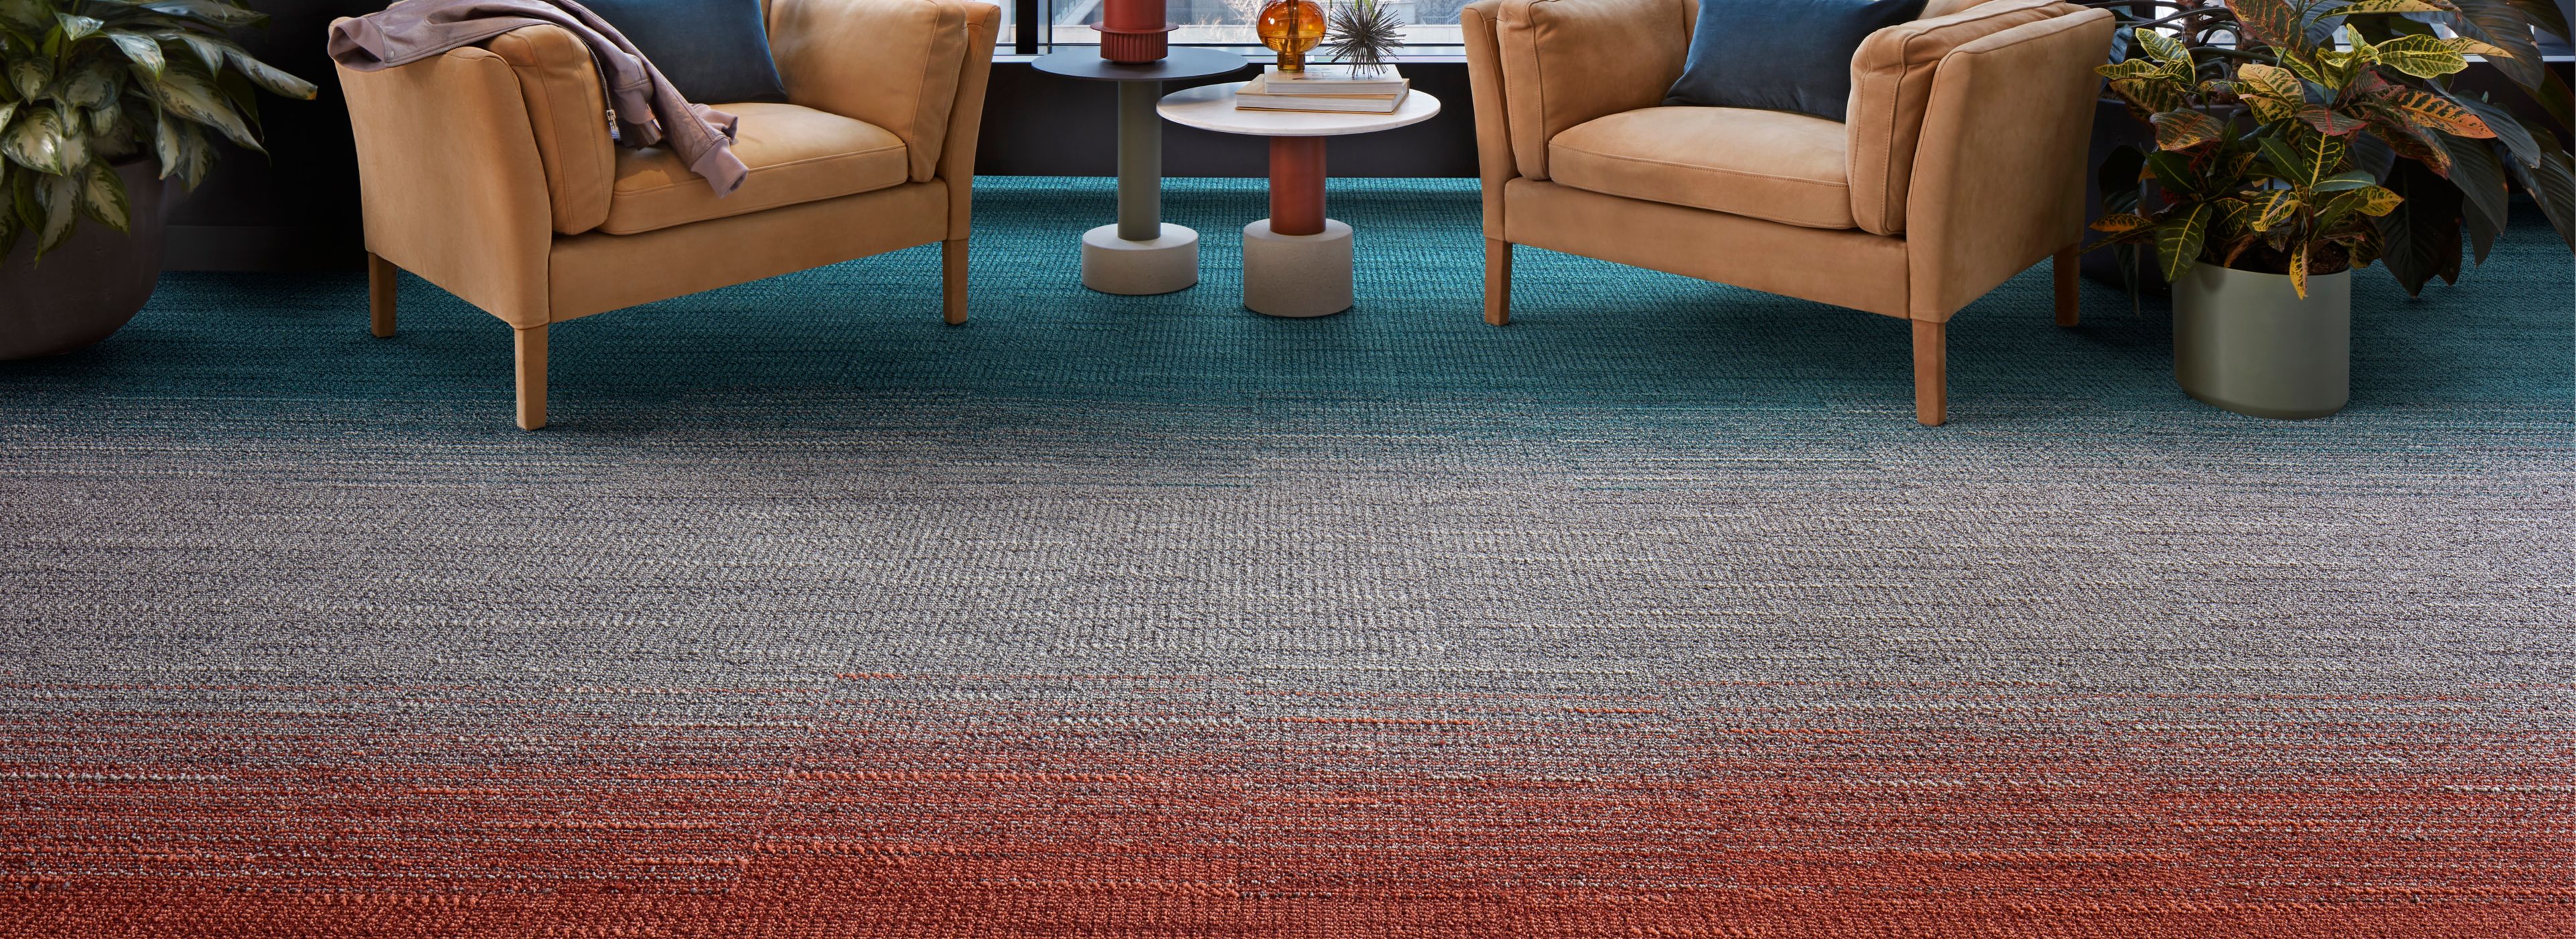 Interface WG100 and WG200 carpet tile in lobby image number 1